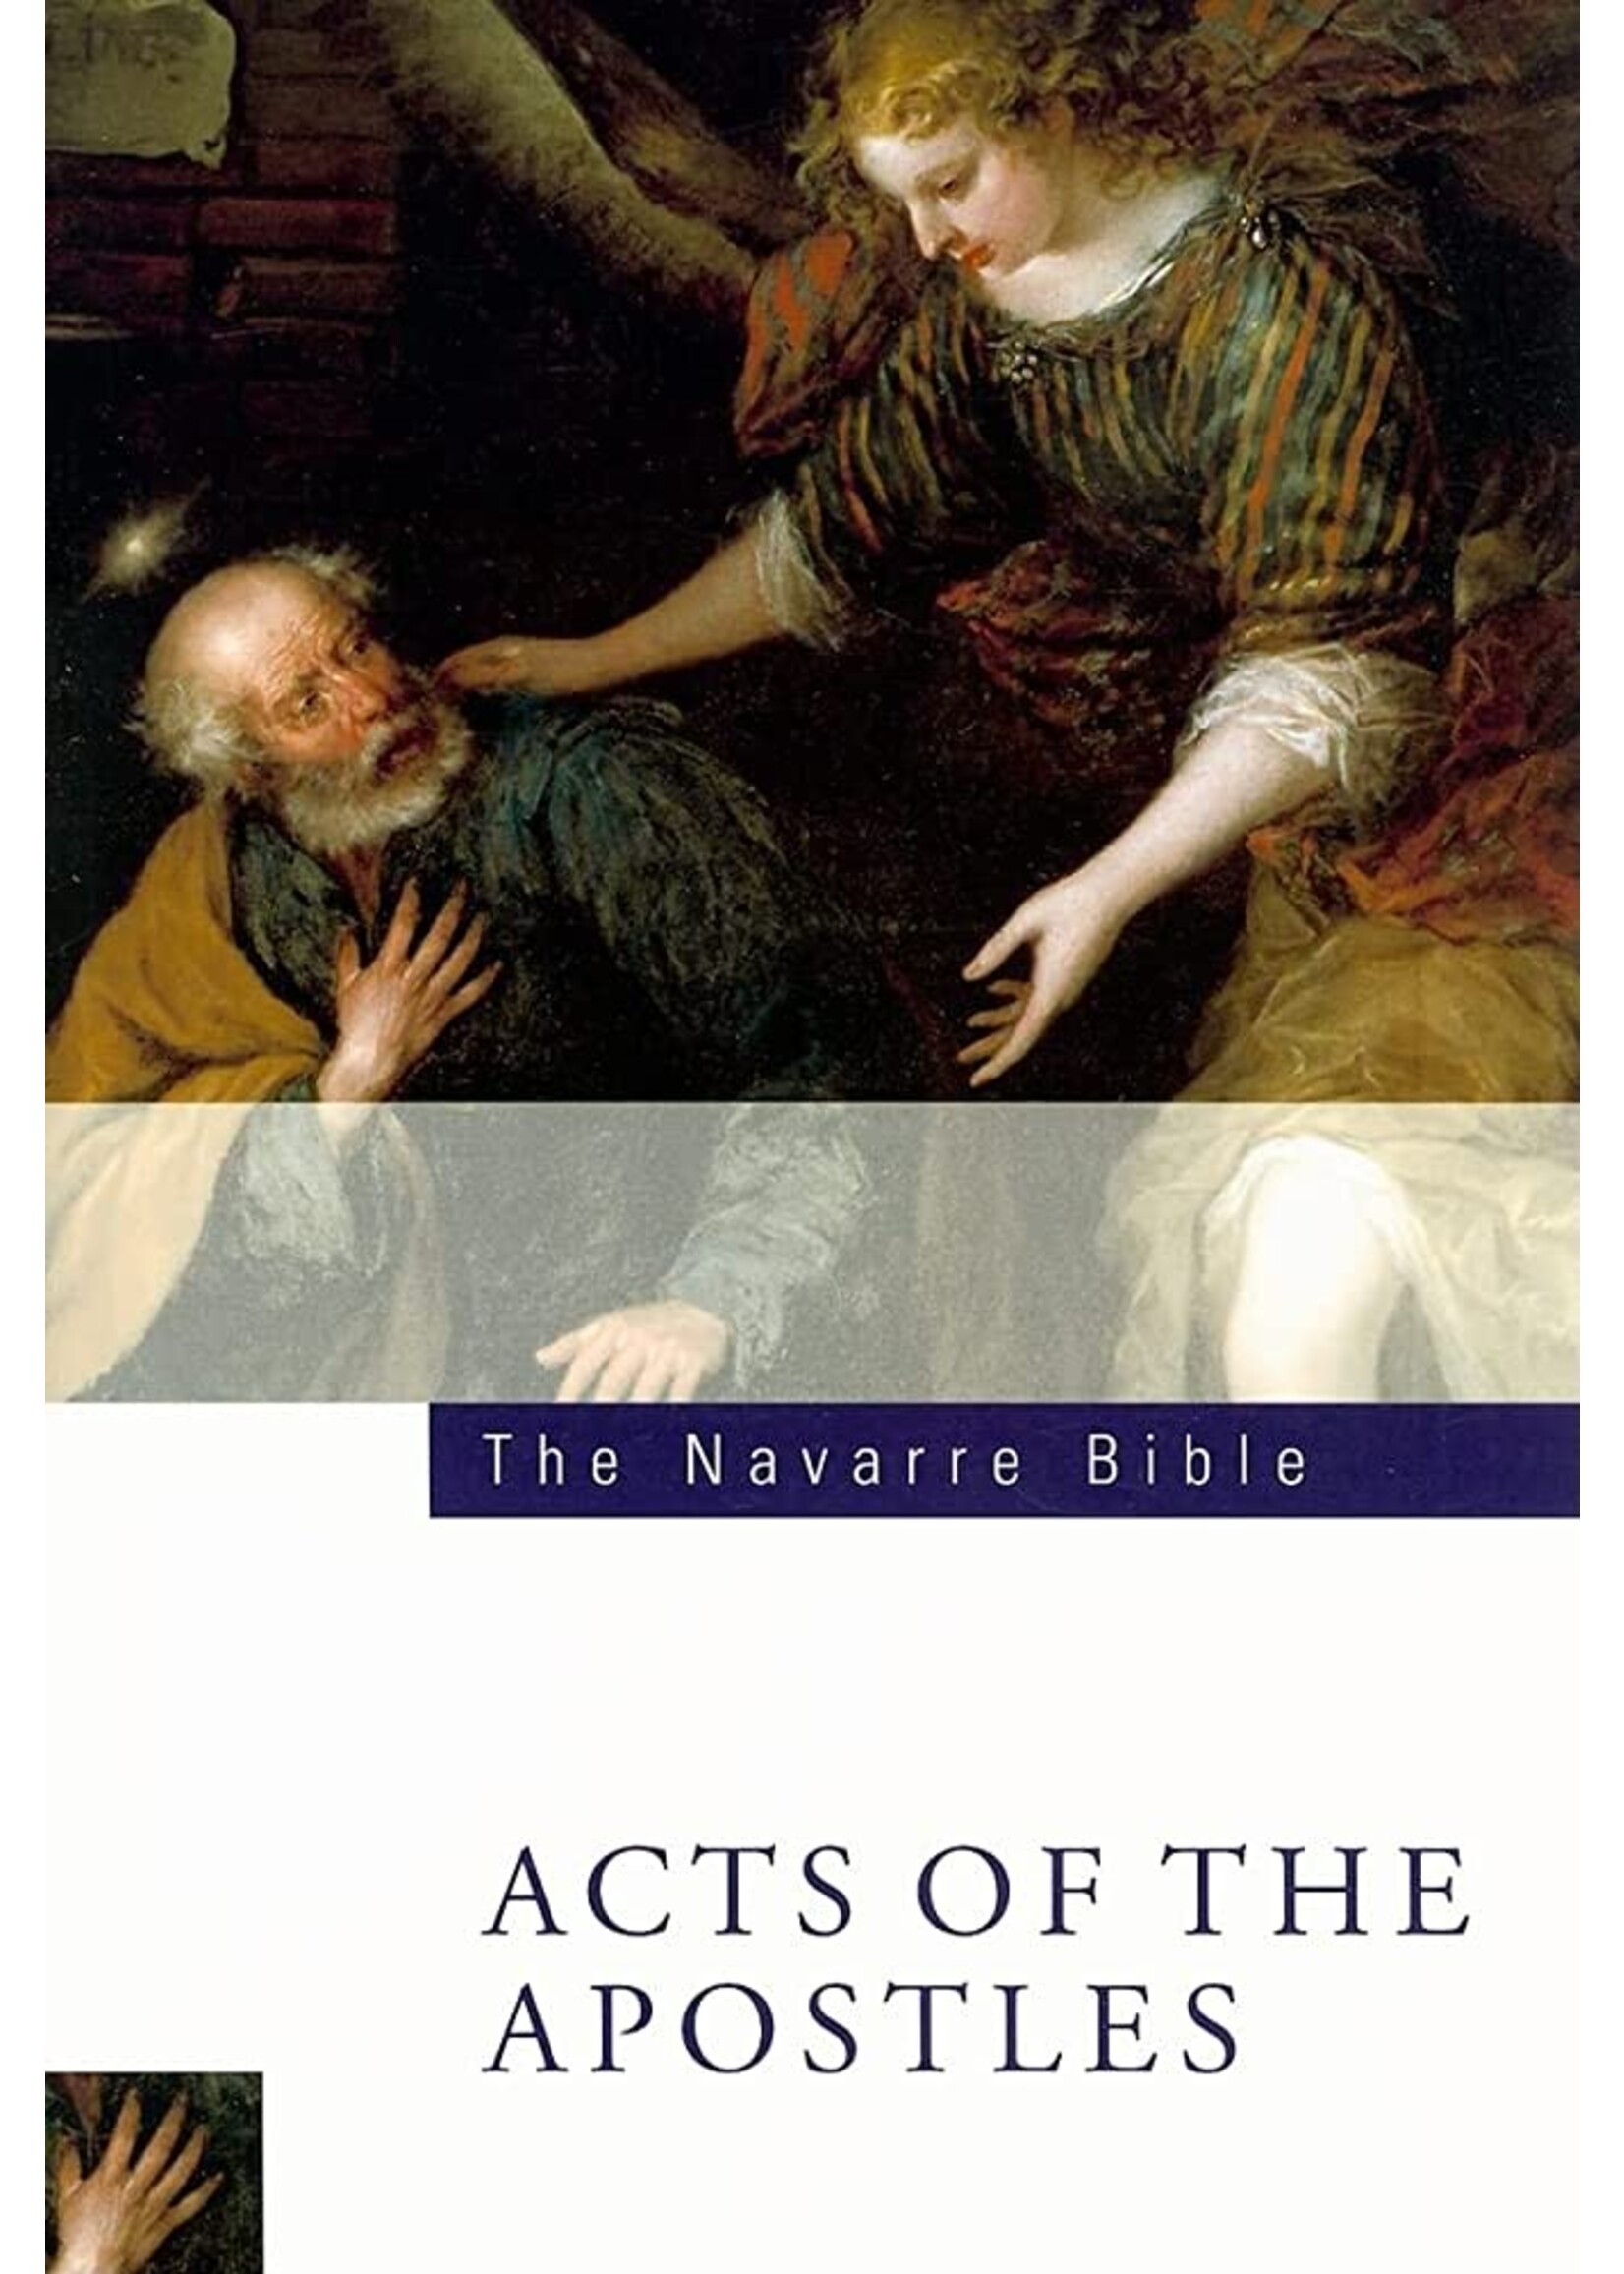 The Navarre Bible: Acts of the Apostles